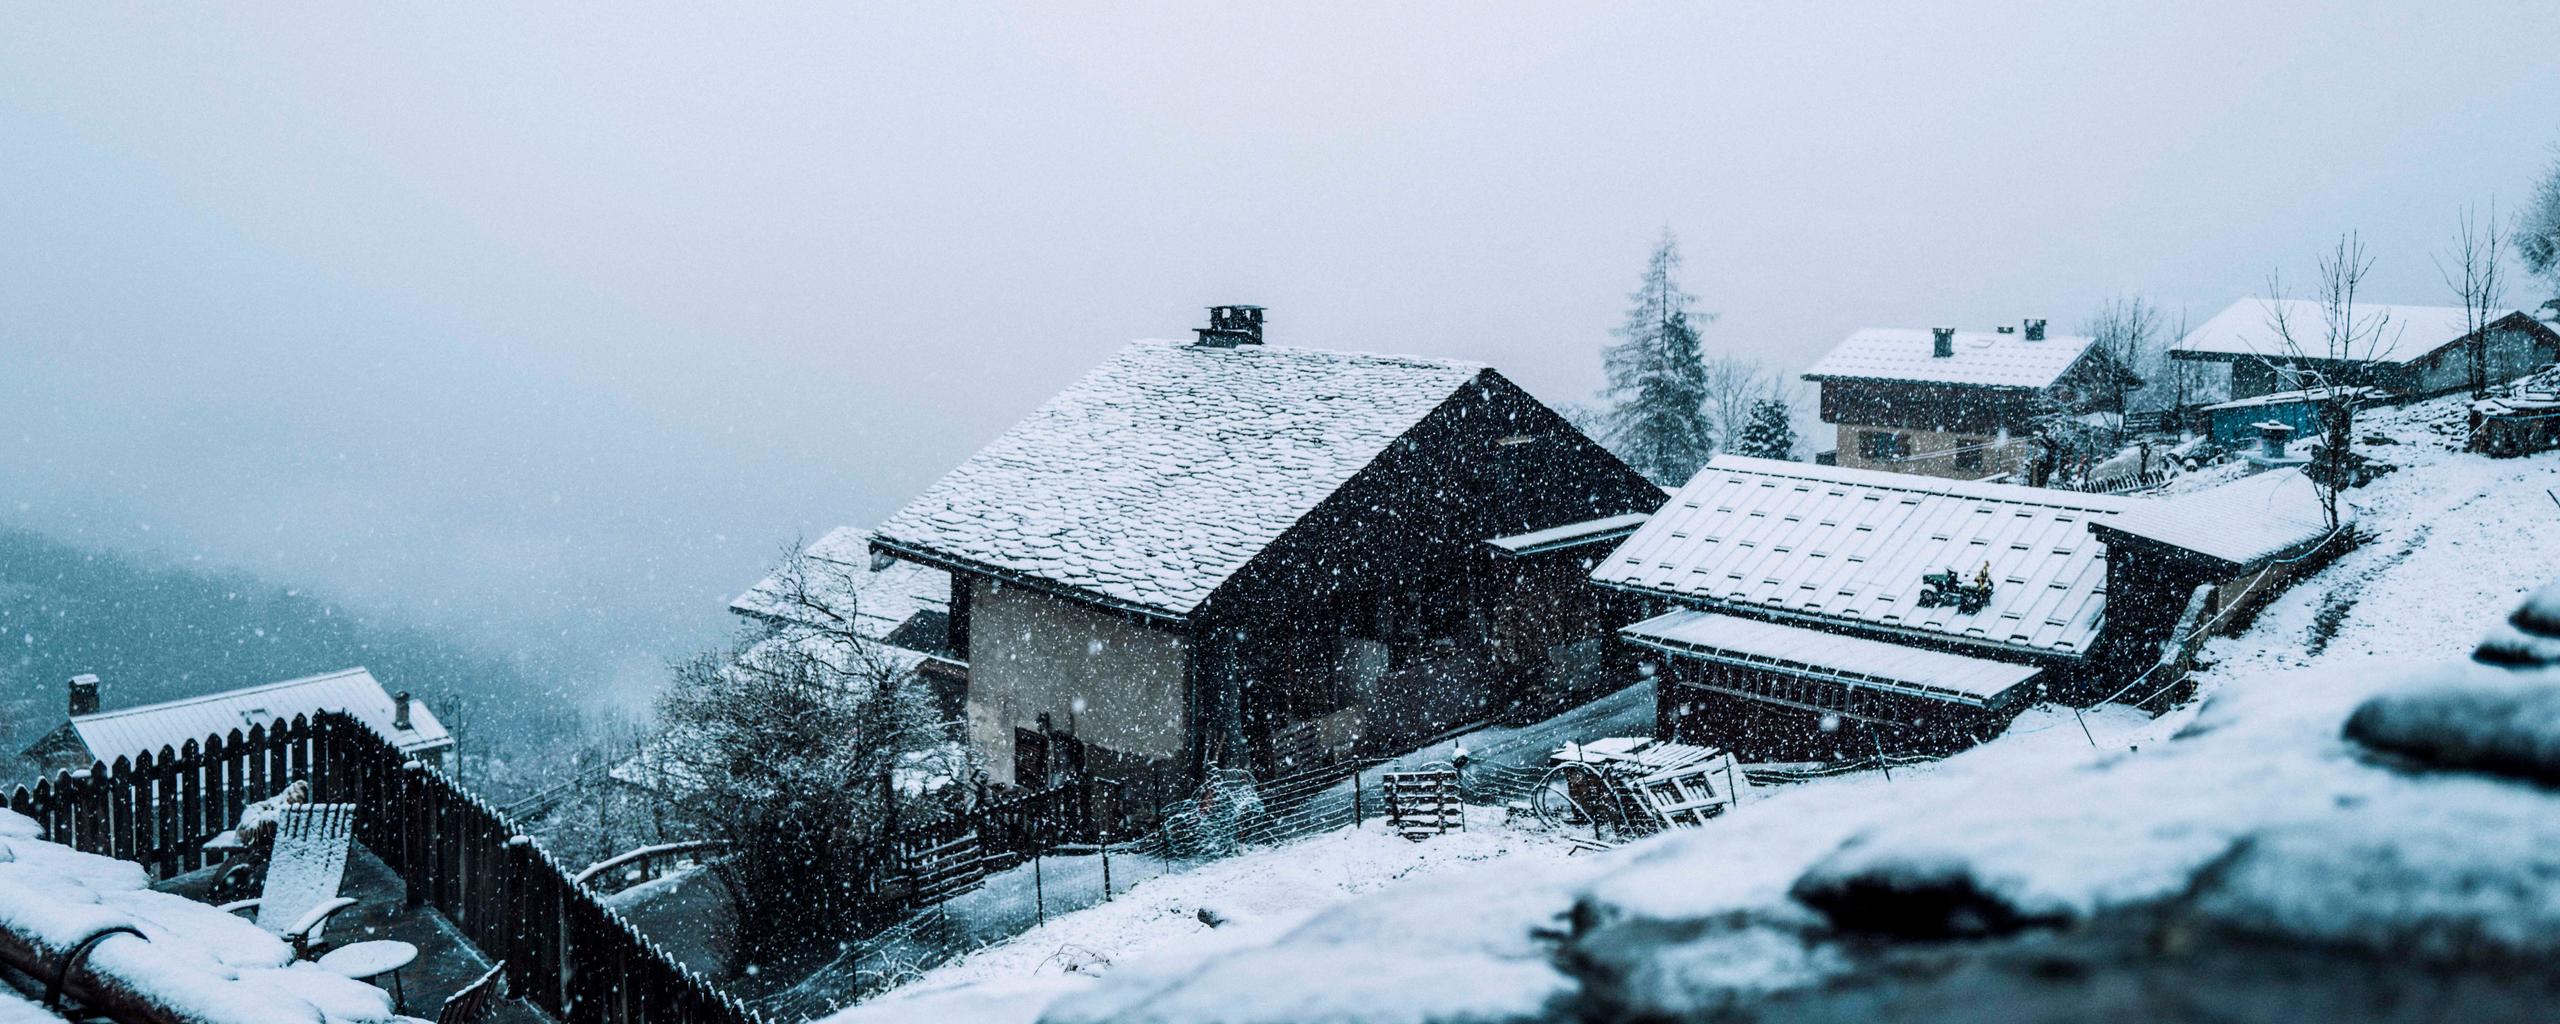 Snow falling on mountainside town in the French Alps